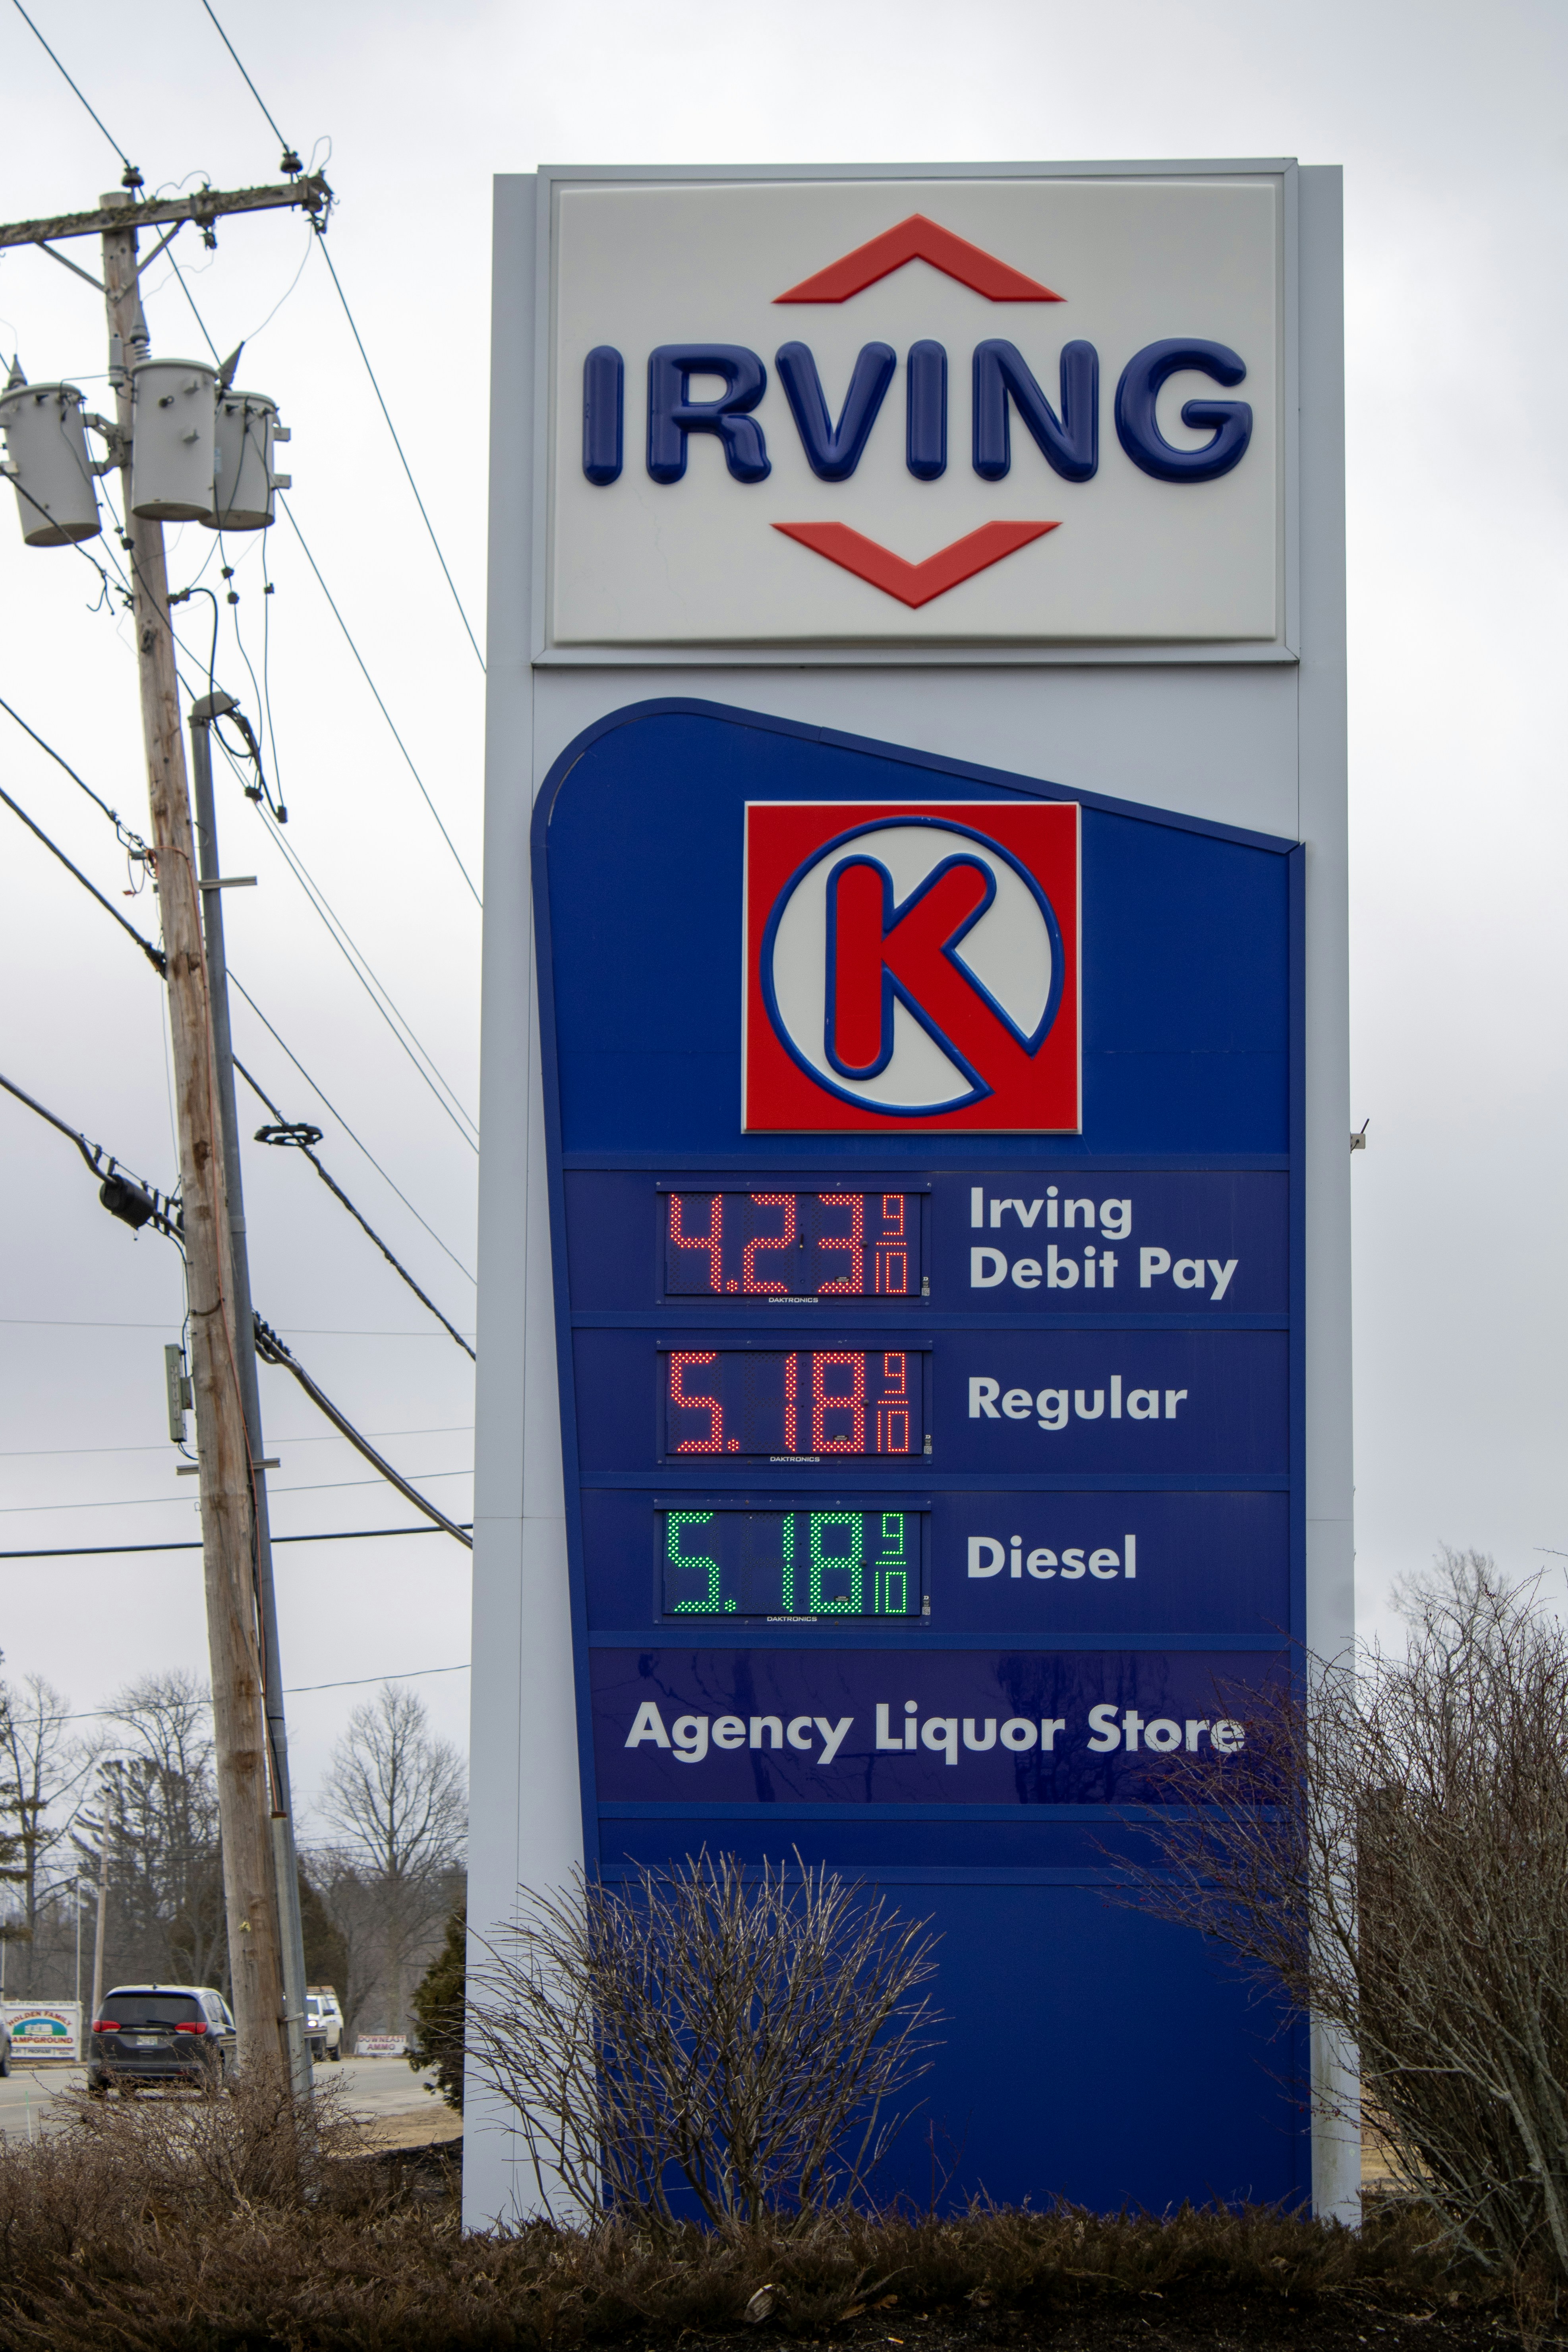 $5.18 gas in Holden, Maine, on March 17, 2022.